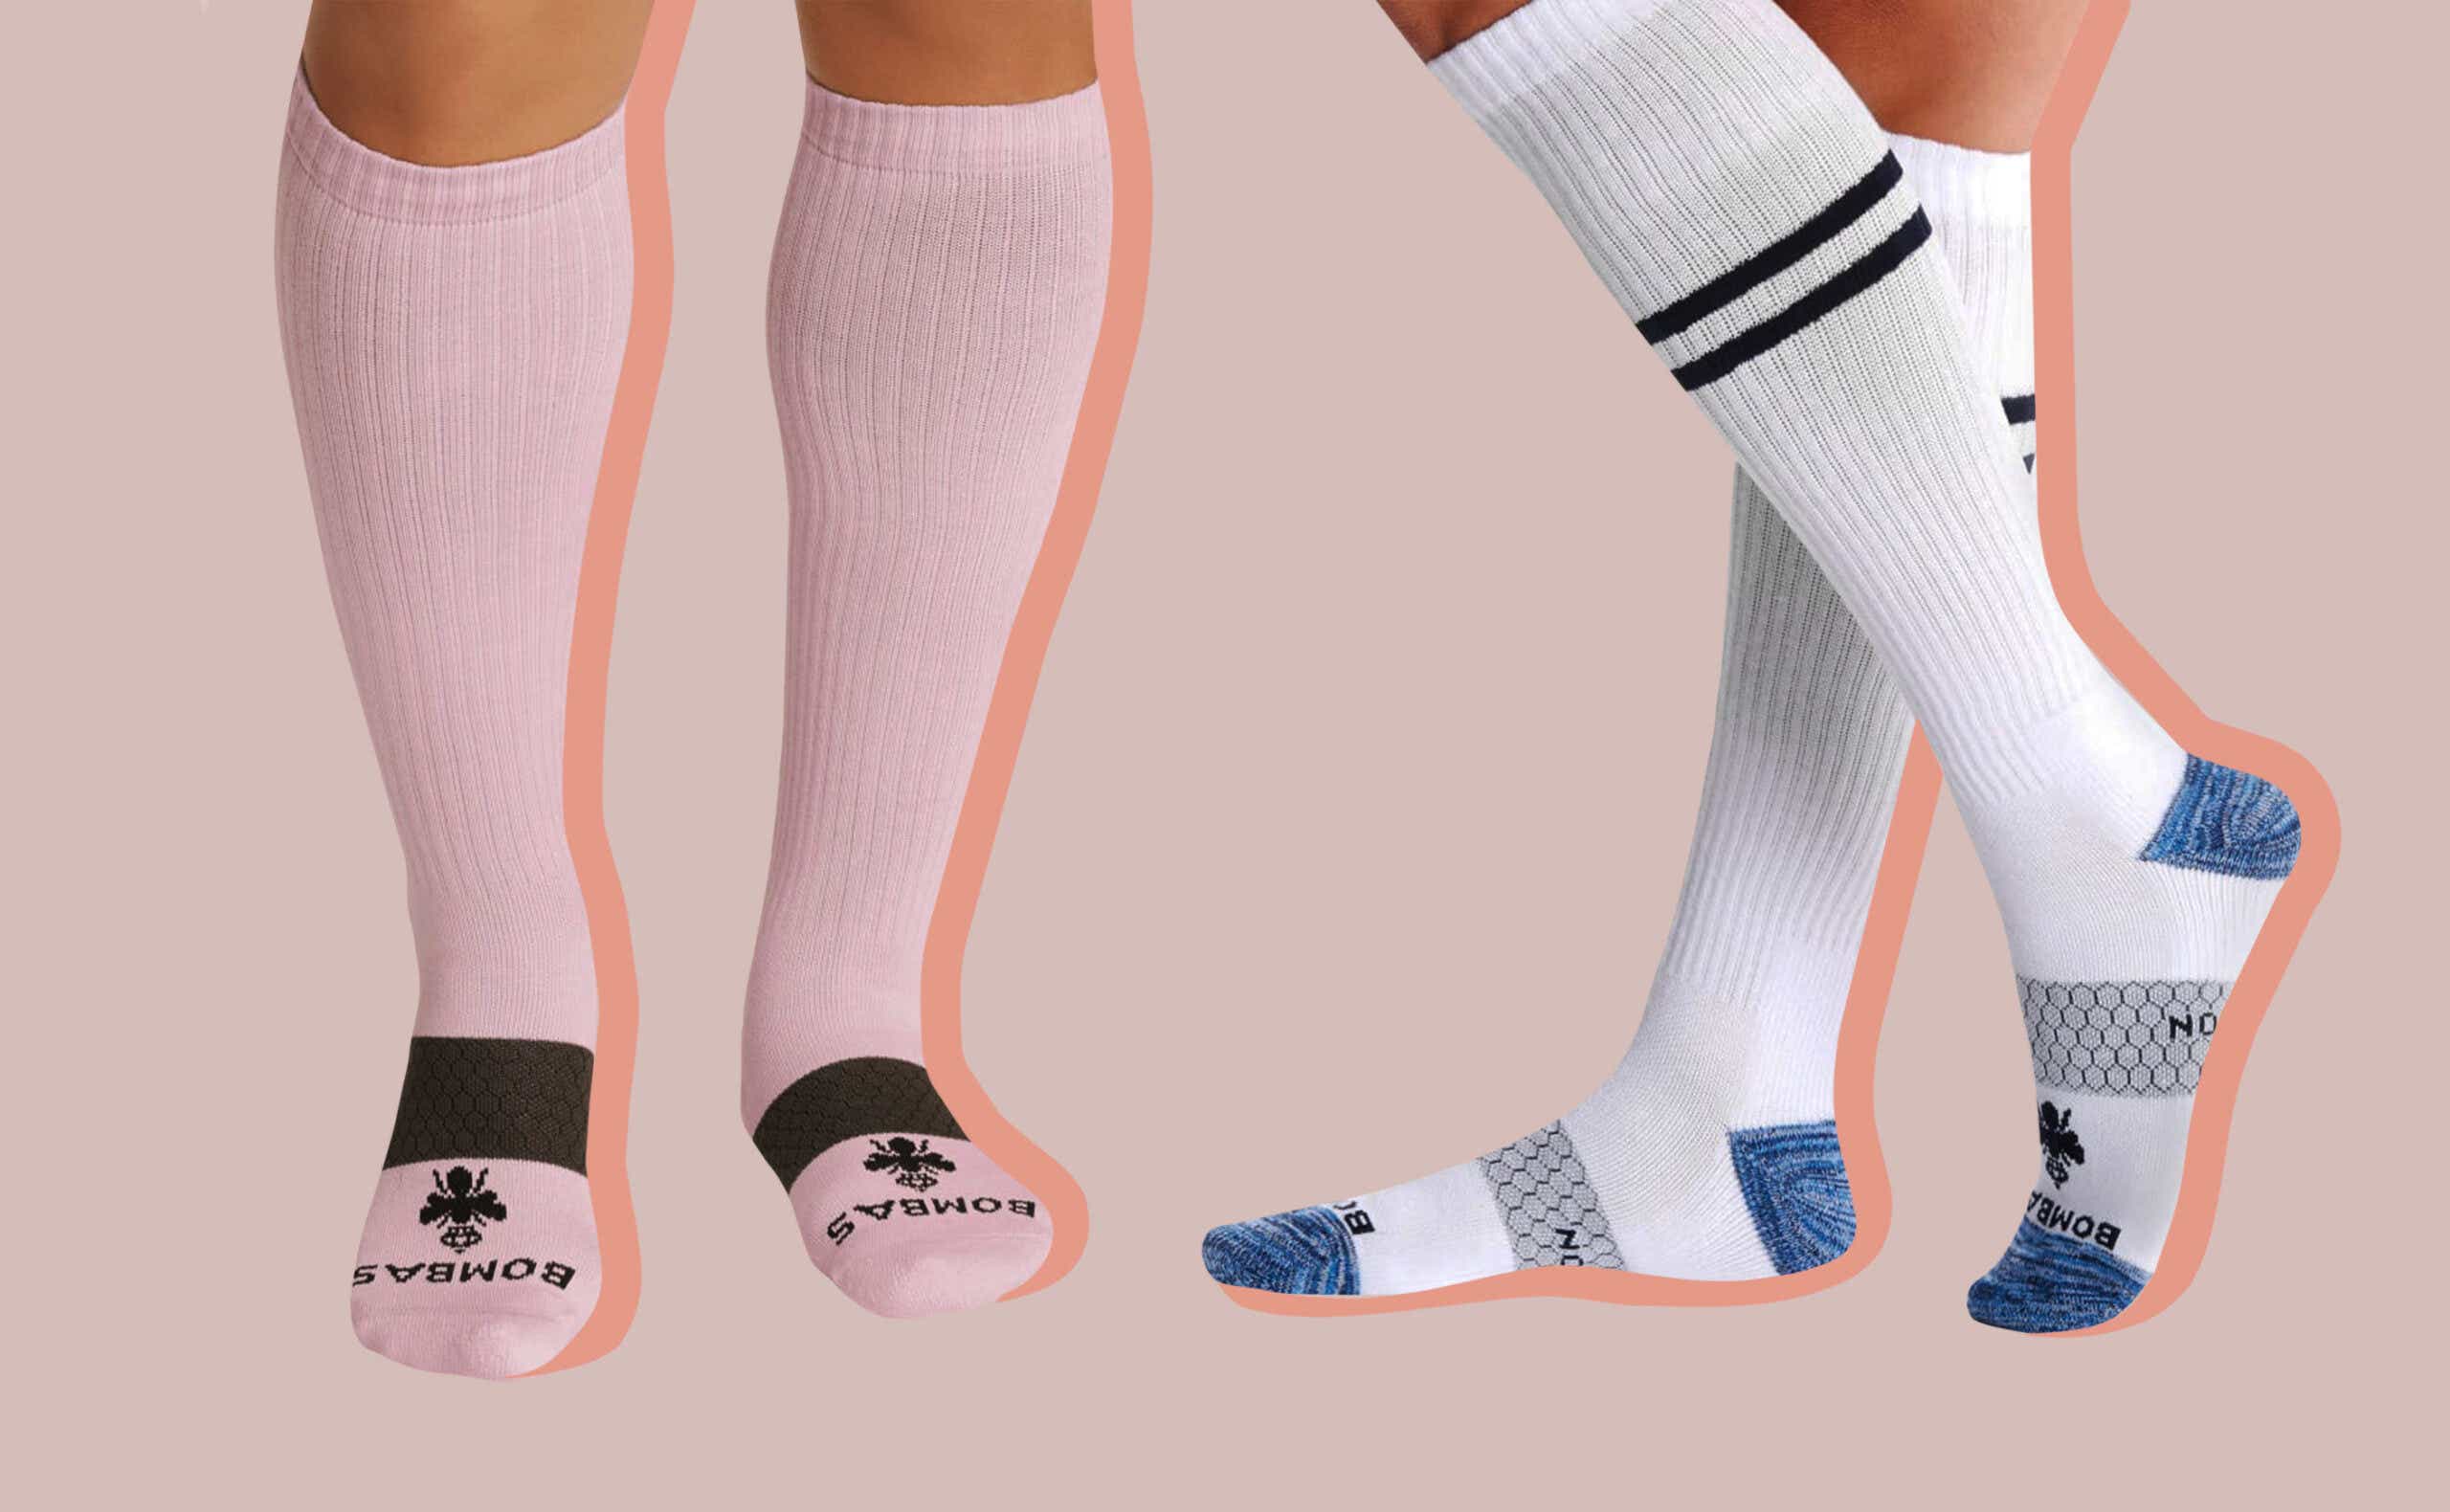 Two sets of legs wearing Bombas Compression socks on a pink background